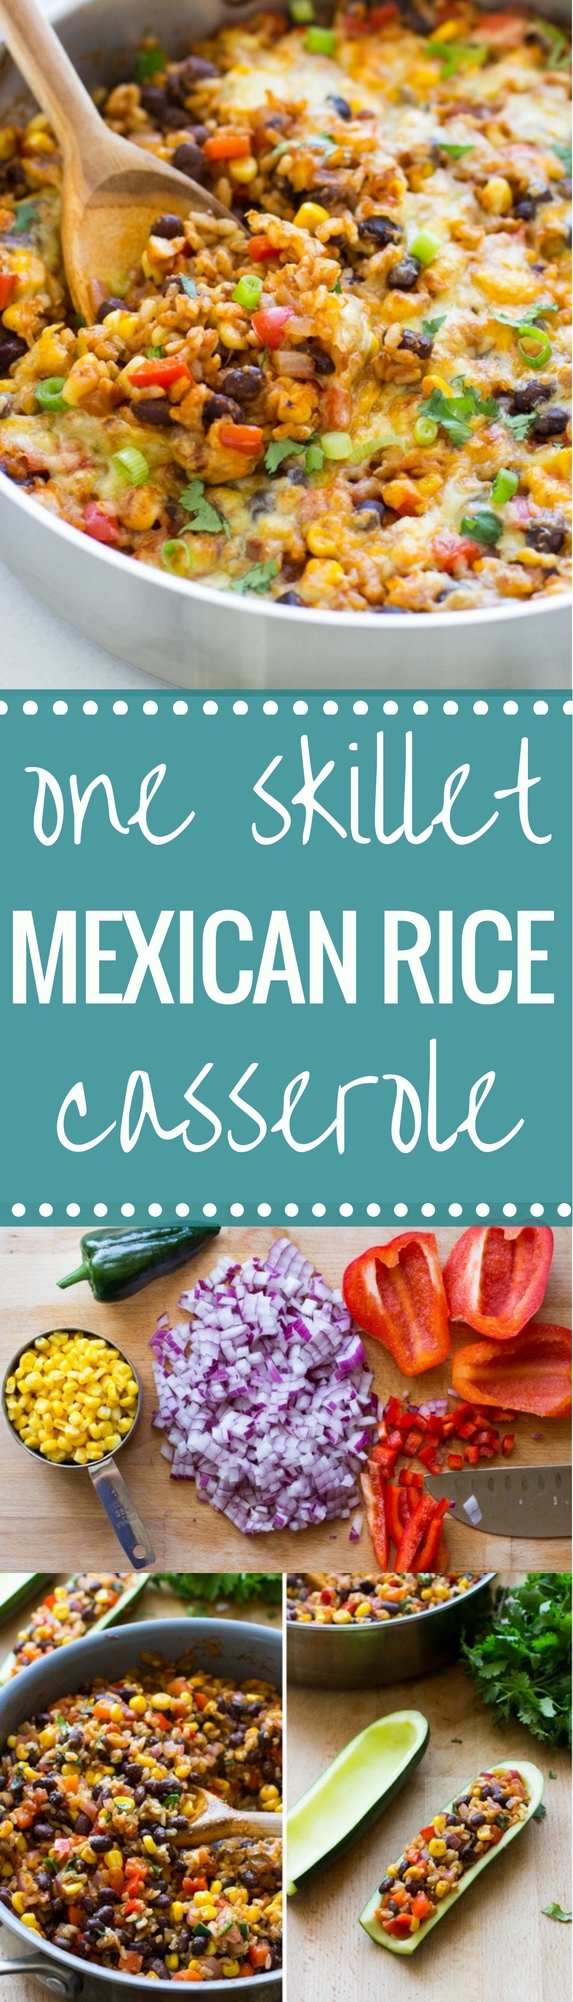 One Skillet Mexican Rice Casserole- an easy dinner recipe with almost zero clean up! (gluten free + vegetarian)